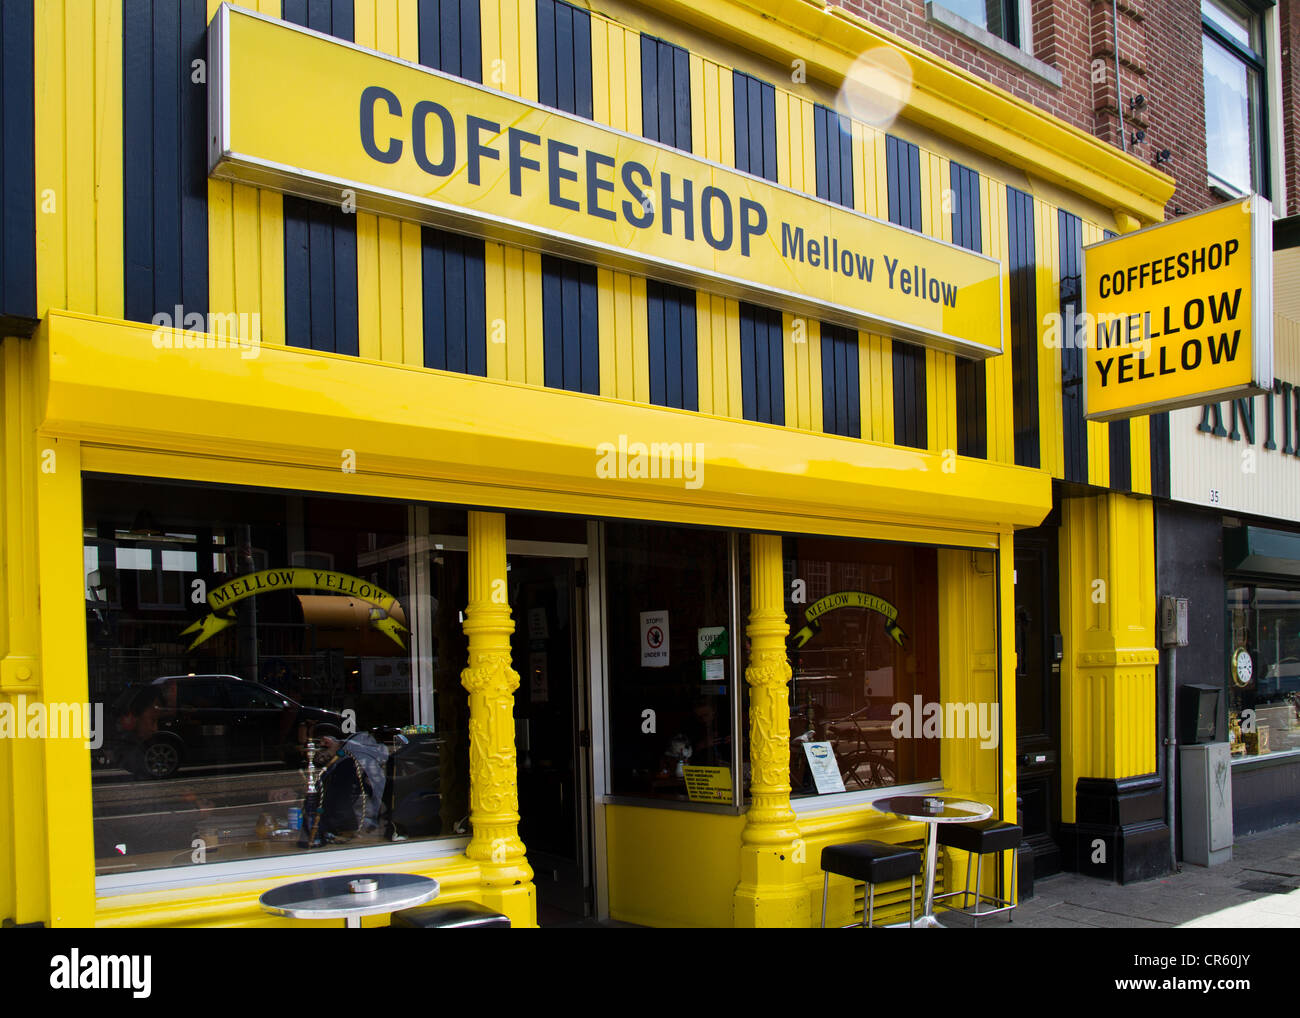 Coffeeshop Mellow Yellow in Amsterdam where cannabis is for sale. Stock Photo